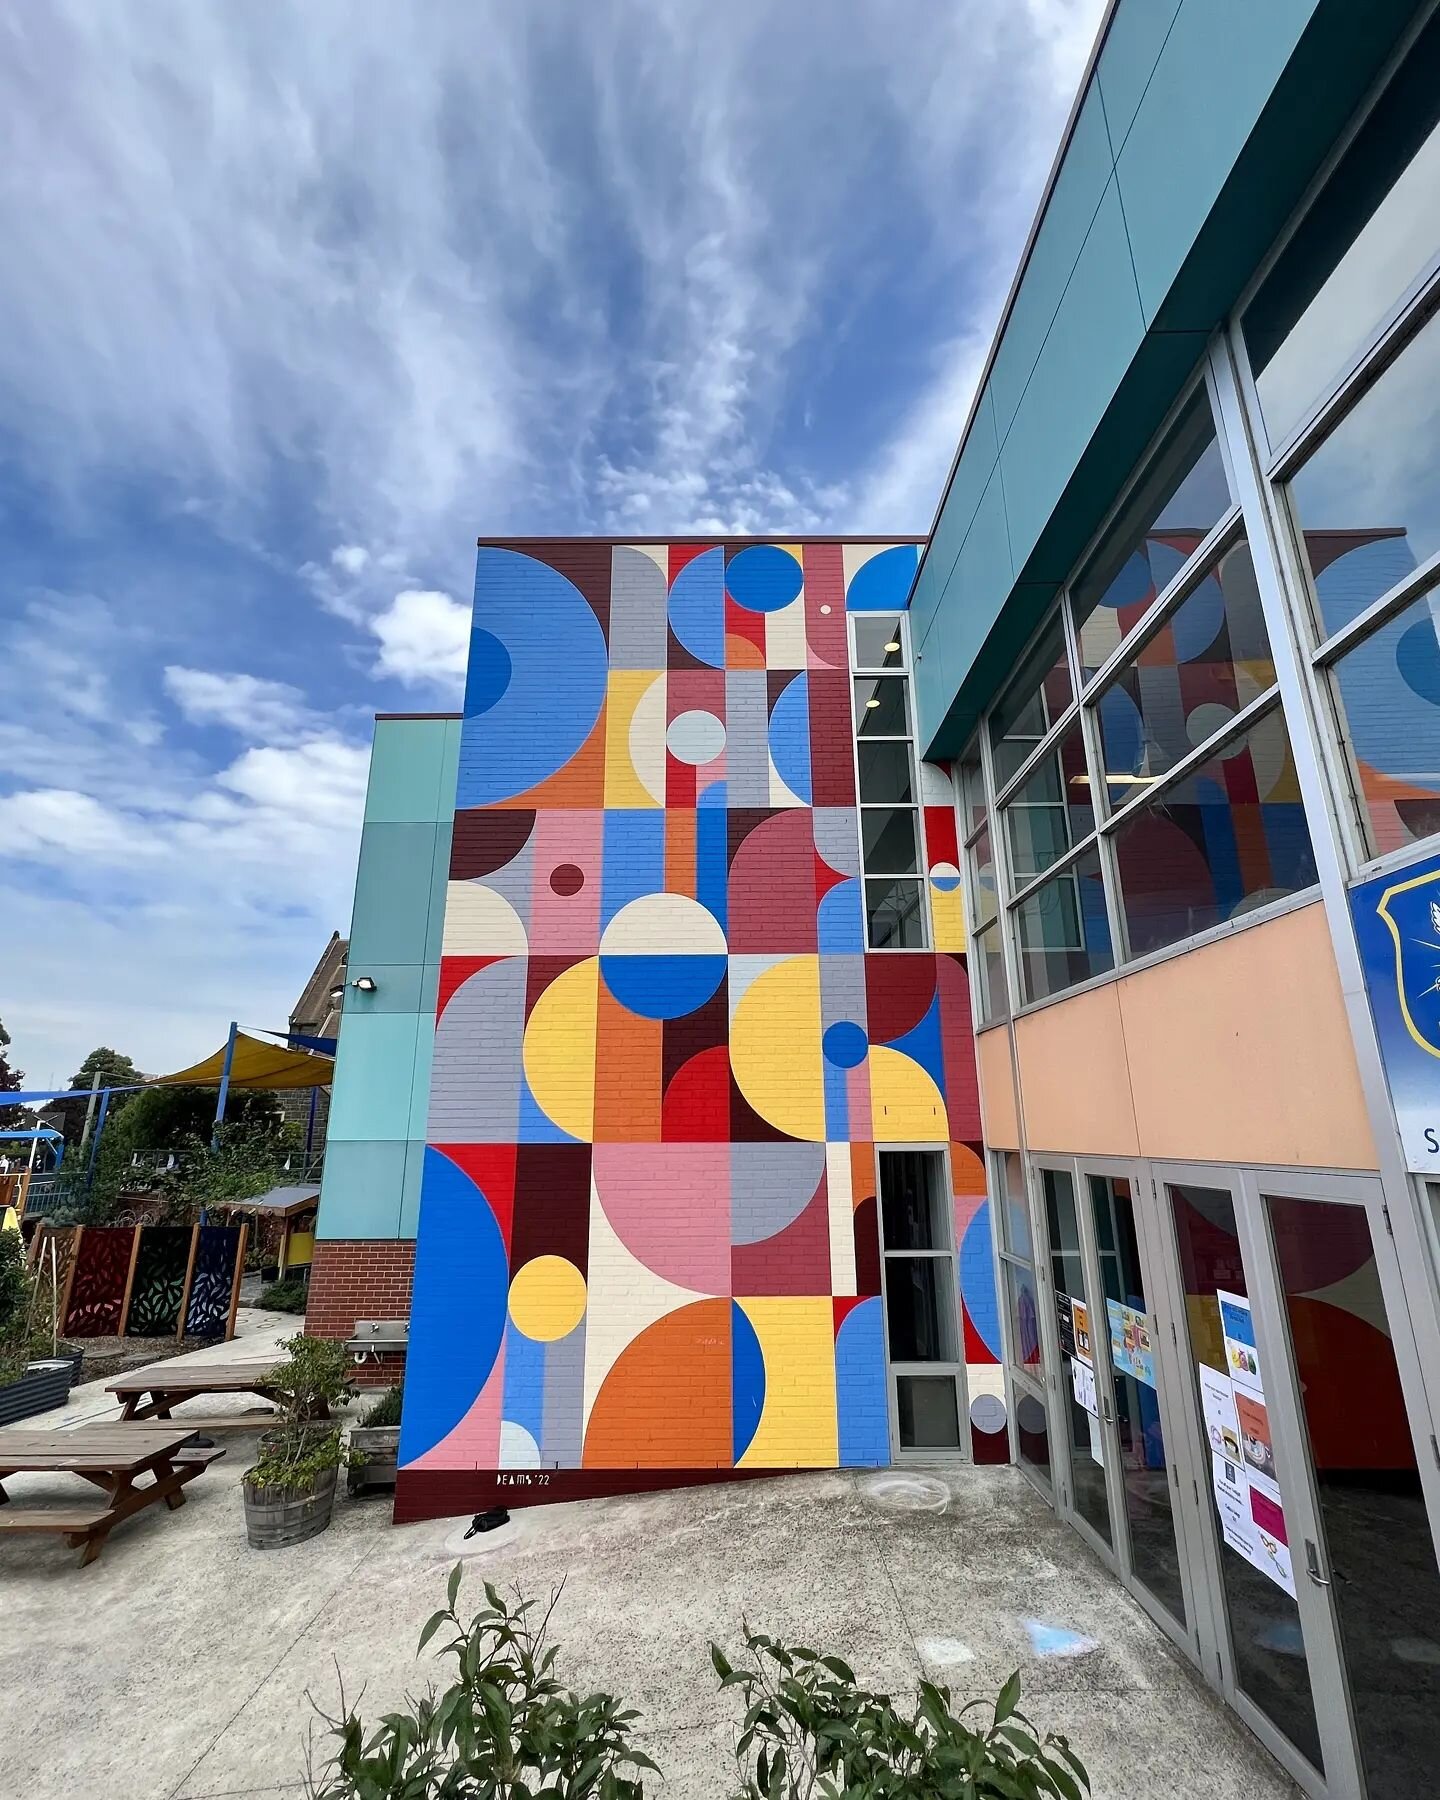 Finished work for St. John's Primary School in Clifton Hill (VIC). Pics - compliments of Dean Sunshine 👌🏼. Seems I'm the last person to get this up online 😂

#deams #tajdeamsalexander #contemporaryart #streetart #street #painting #graphic #abstrac